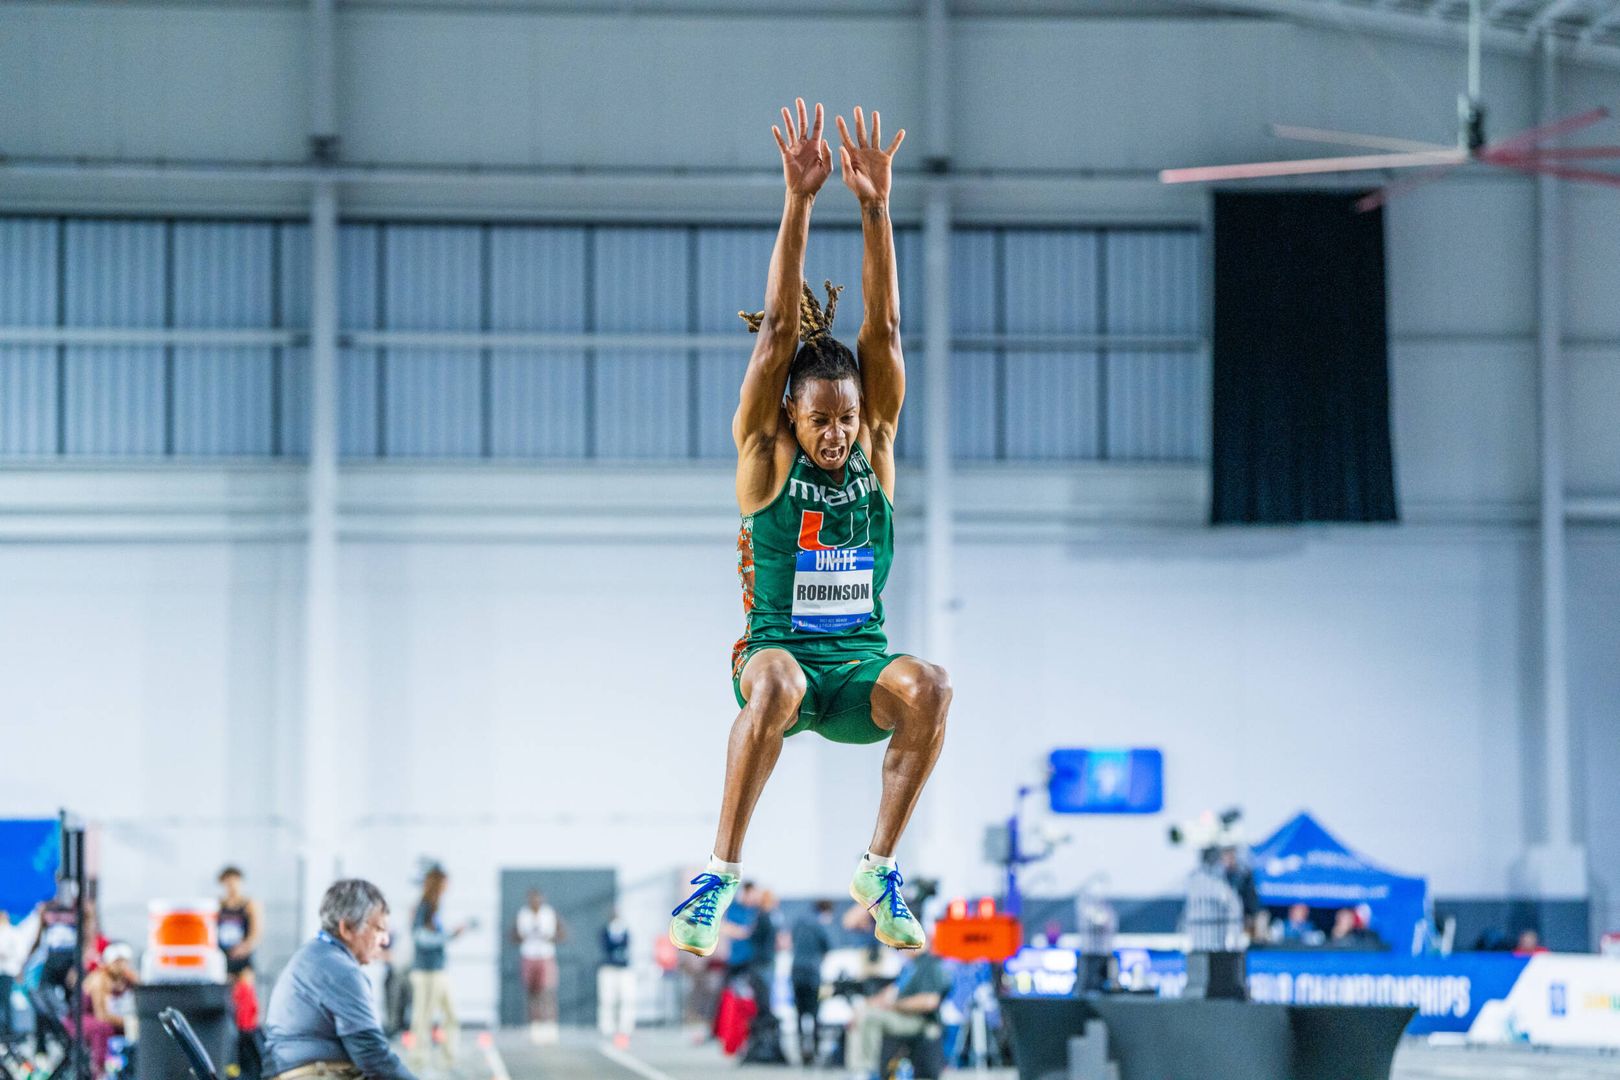 Hurricanes Earn Multiple Finals Spots On Day 2, Robinson Captures Long Jump Silver Medal